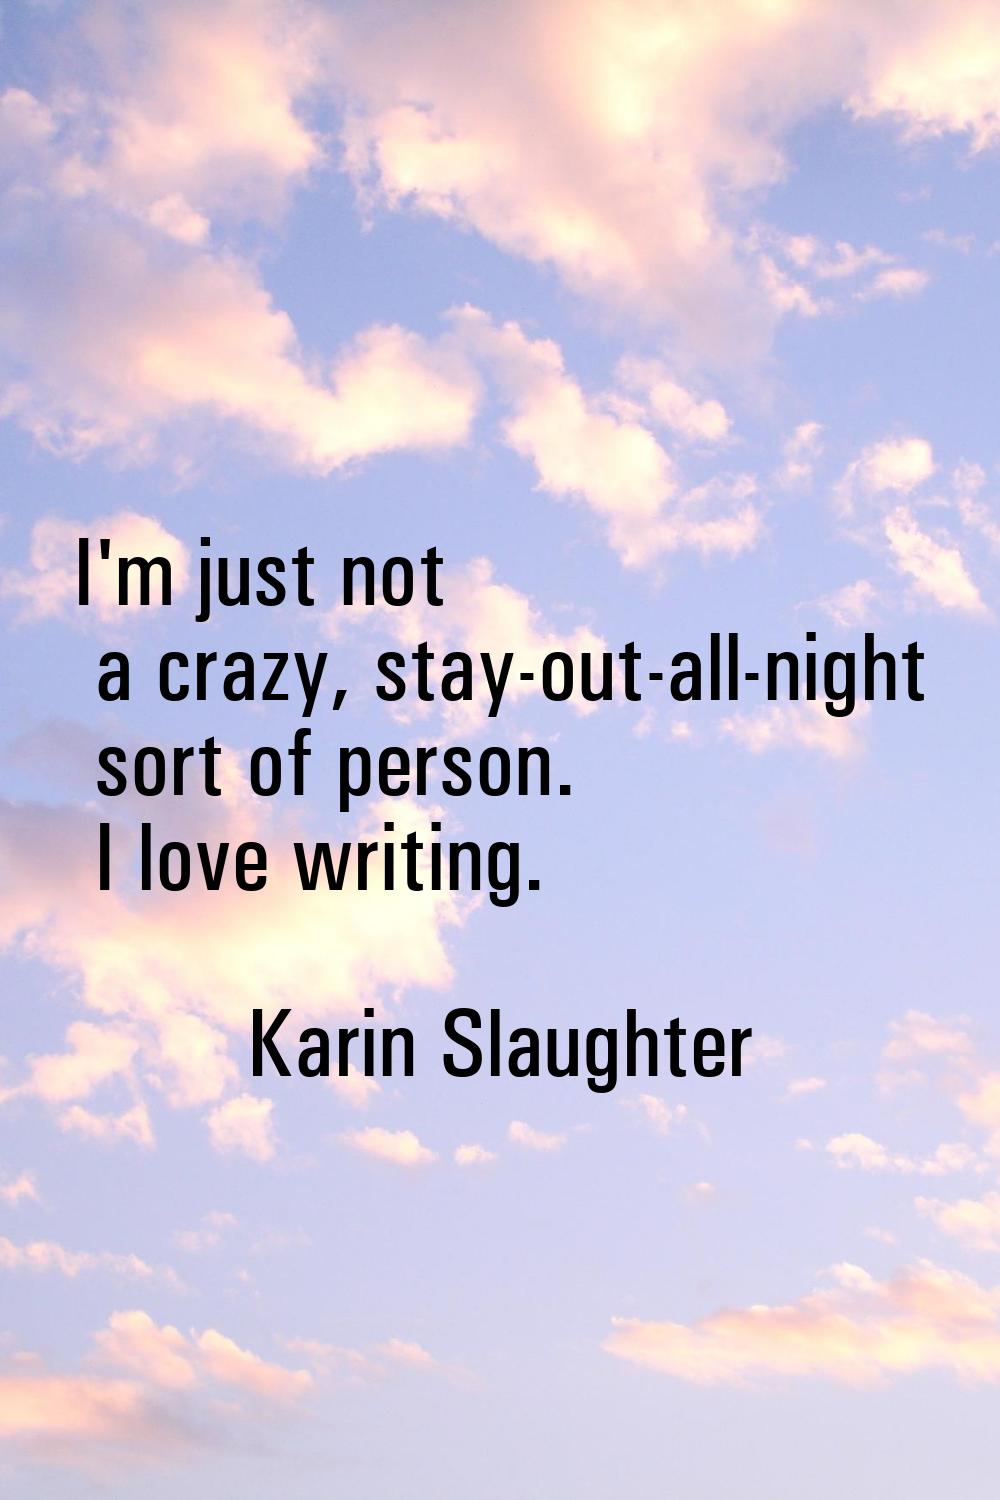 I'm just not a crazy, stay-out-all-night sort of person. I love writing.